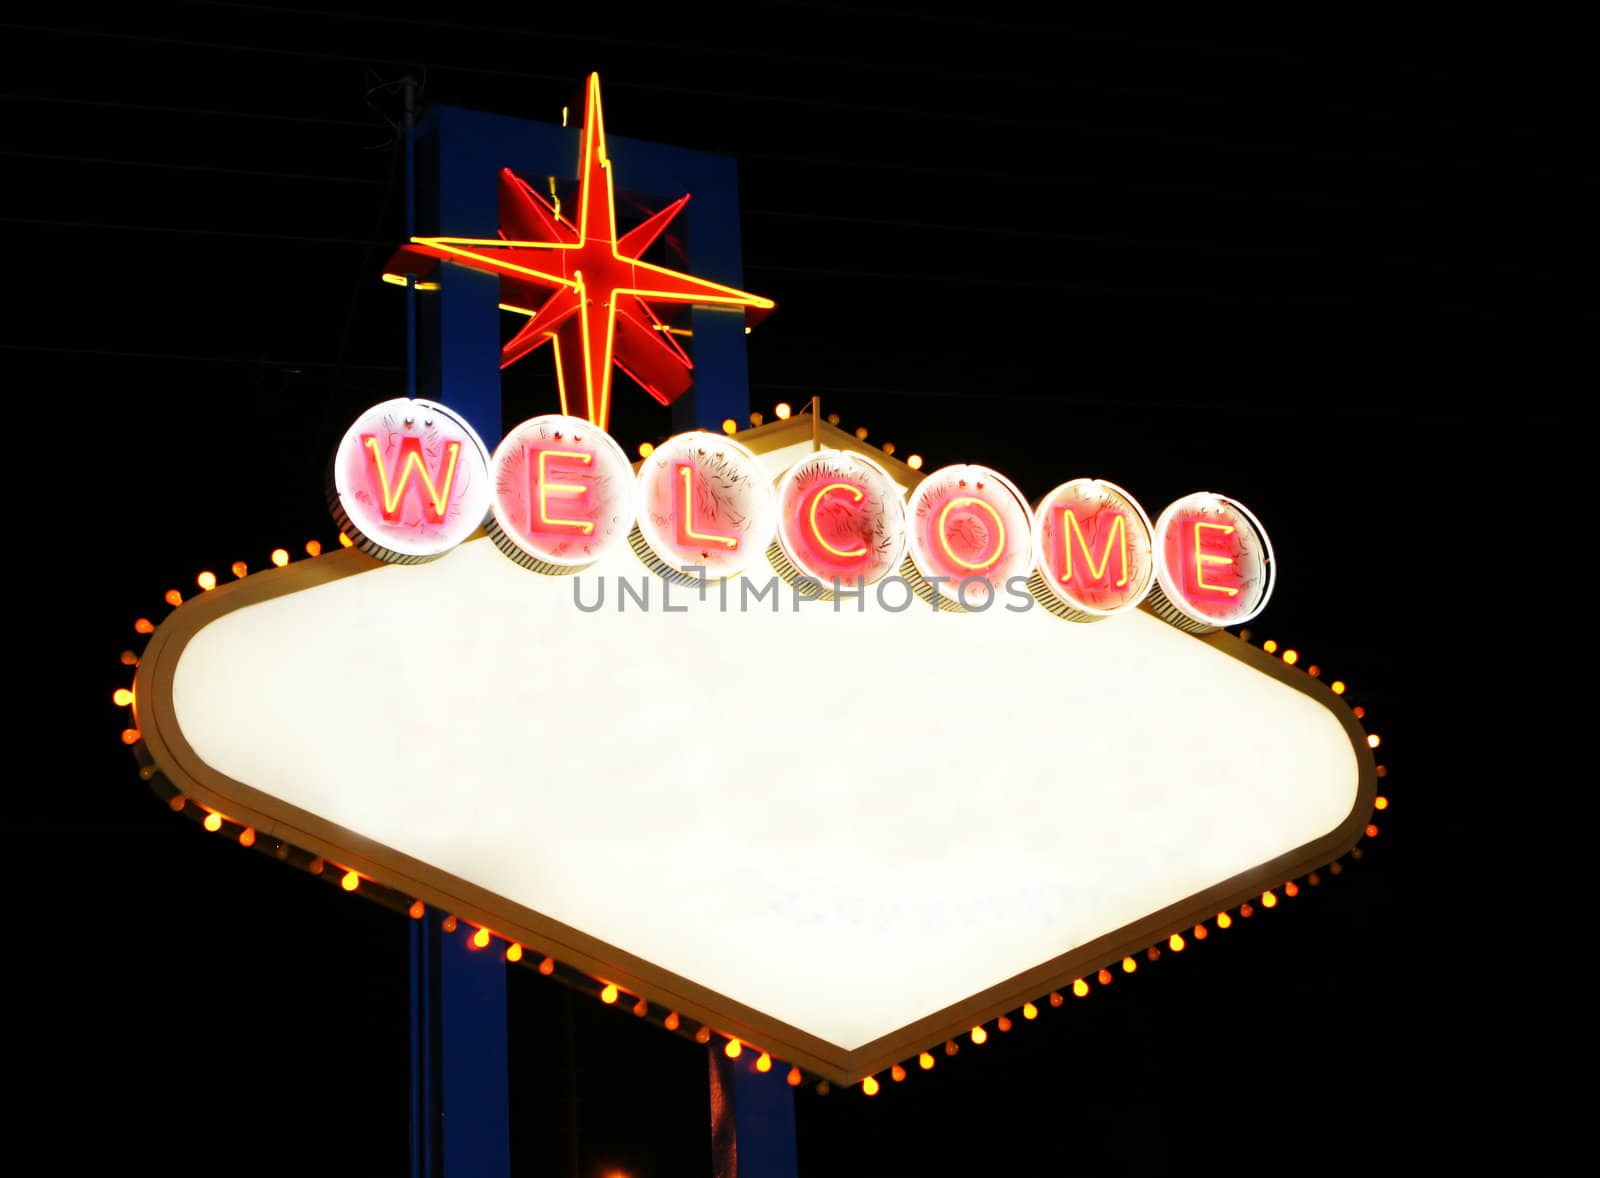 las vegas sign that is blank in the middle with white space open for any text with the icon neon sign from las vegas